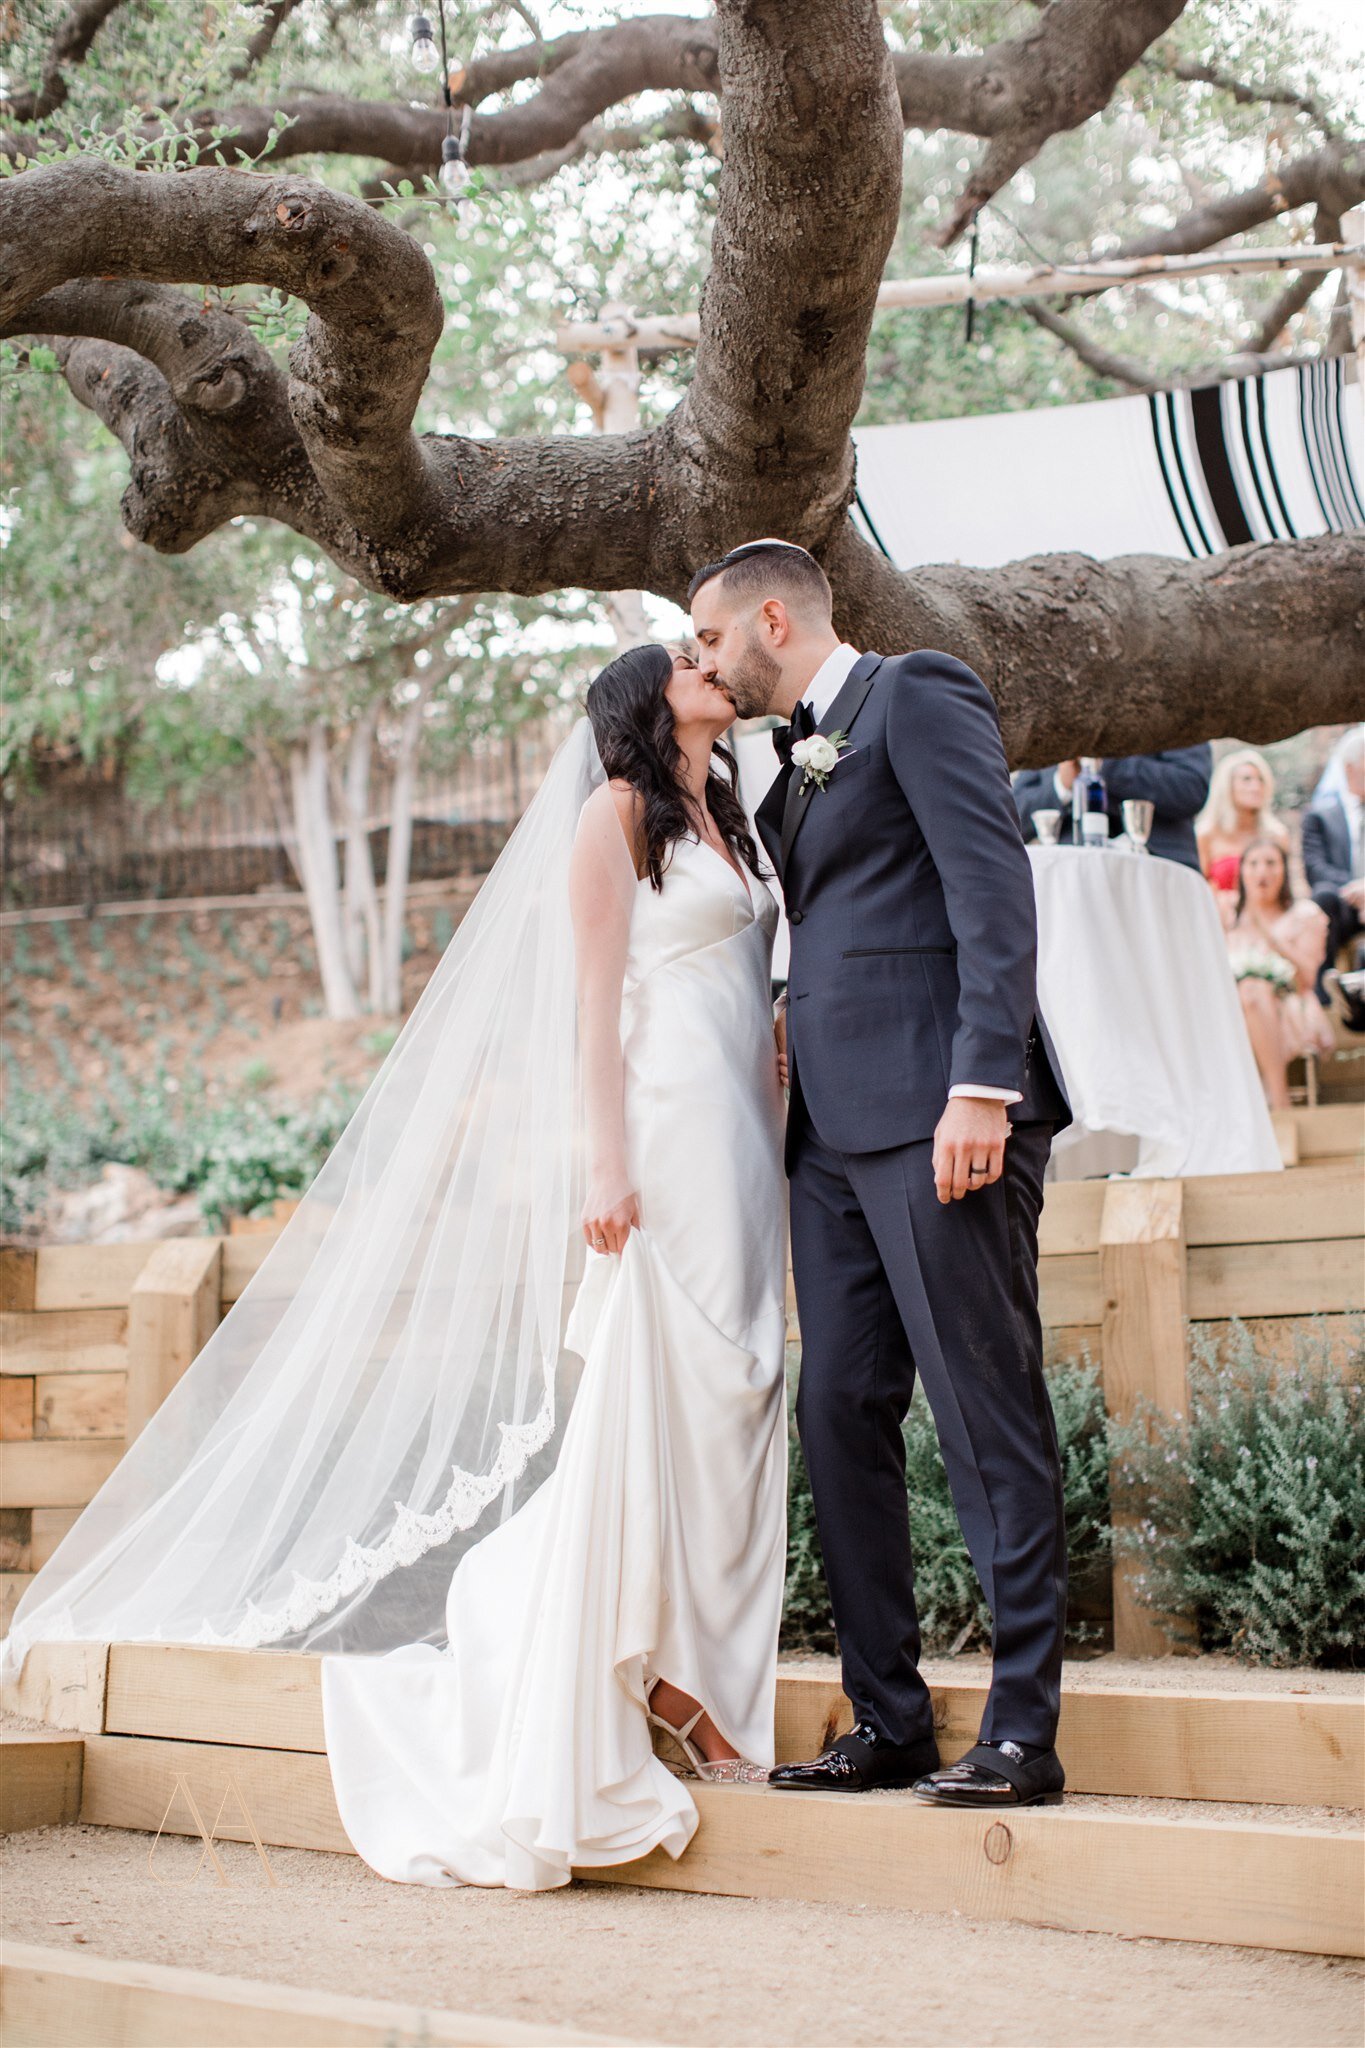 www.santabarbarawedding.com | Brilliant Wedding Co. | Michael &amp; Anna Costa Photography | Margaret Joan Florals | Cheek to Cheek Artistry | Bride and Groom Kiss After the Ceremony